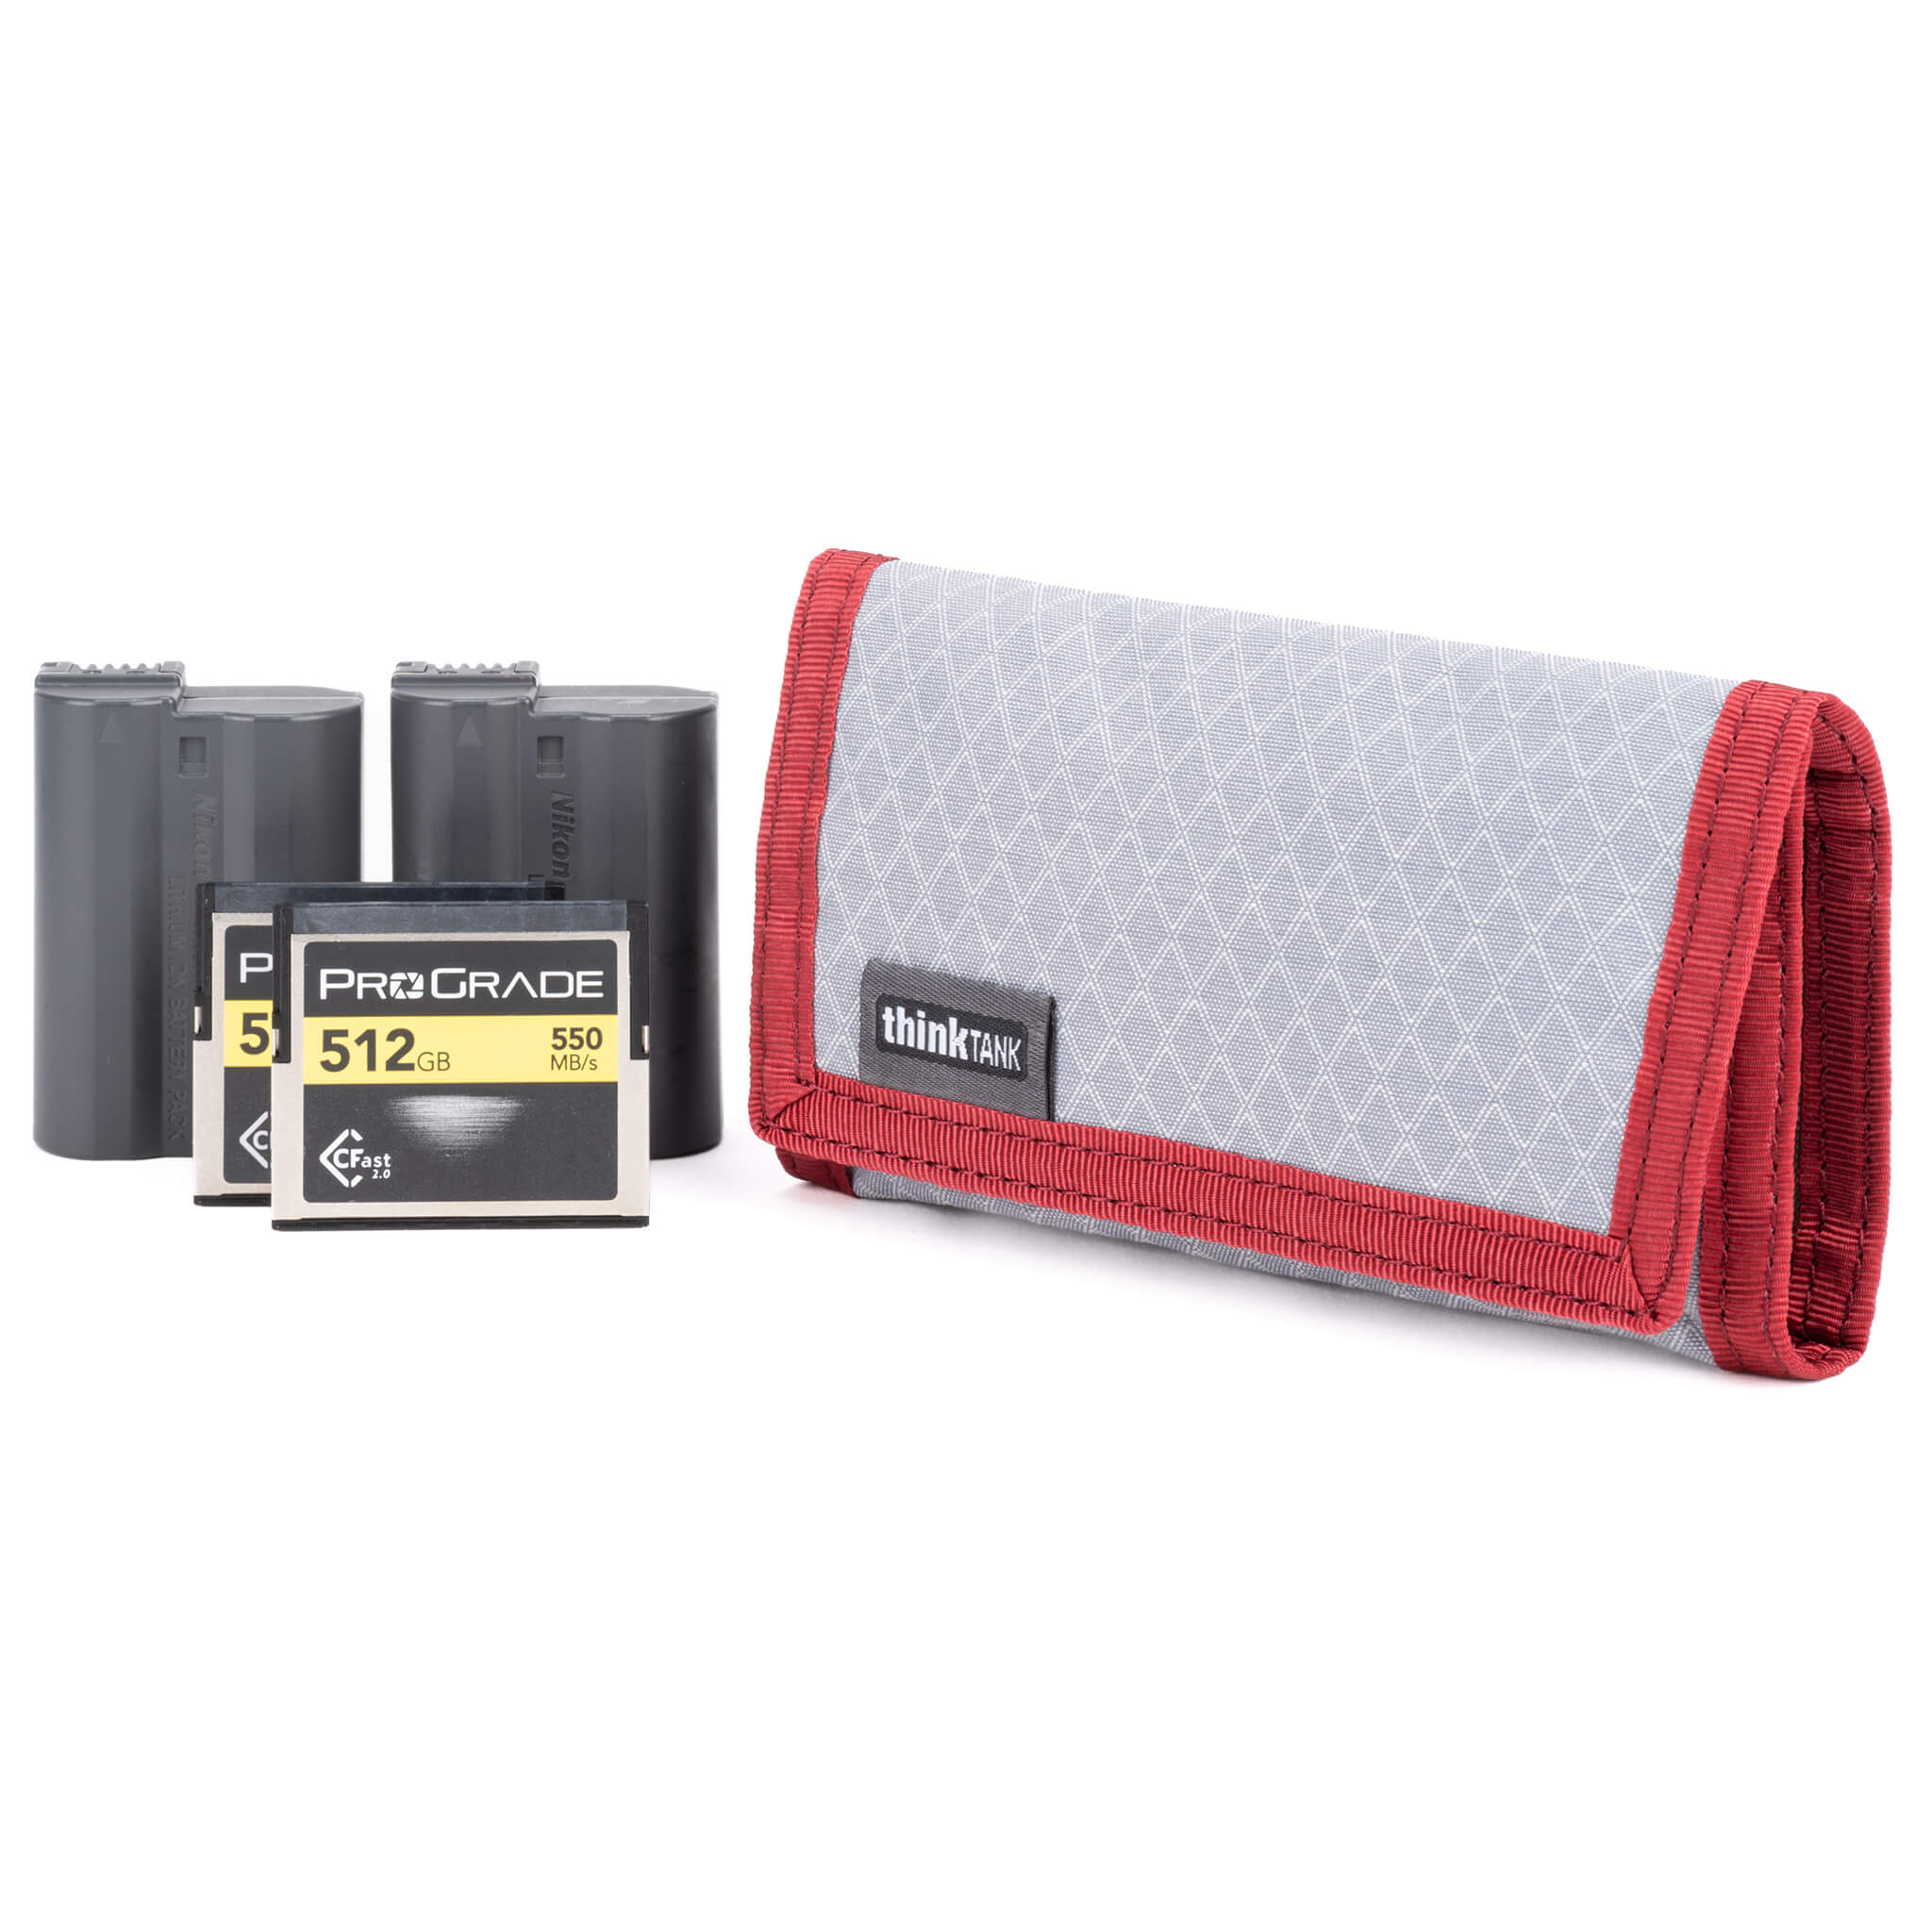 thinkTANK Cards and Power (Chili Pepper Red) - B&C Camera